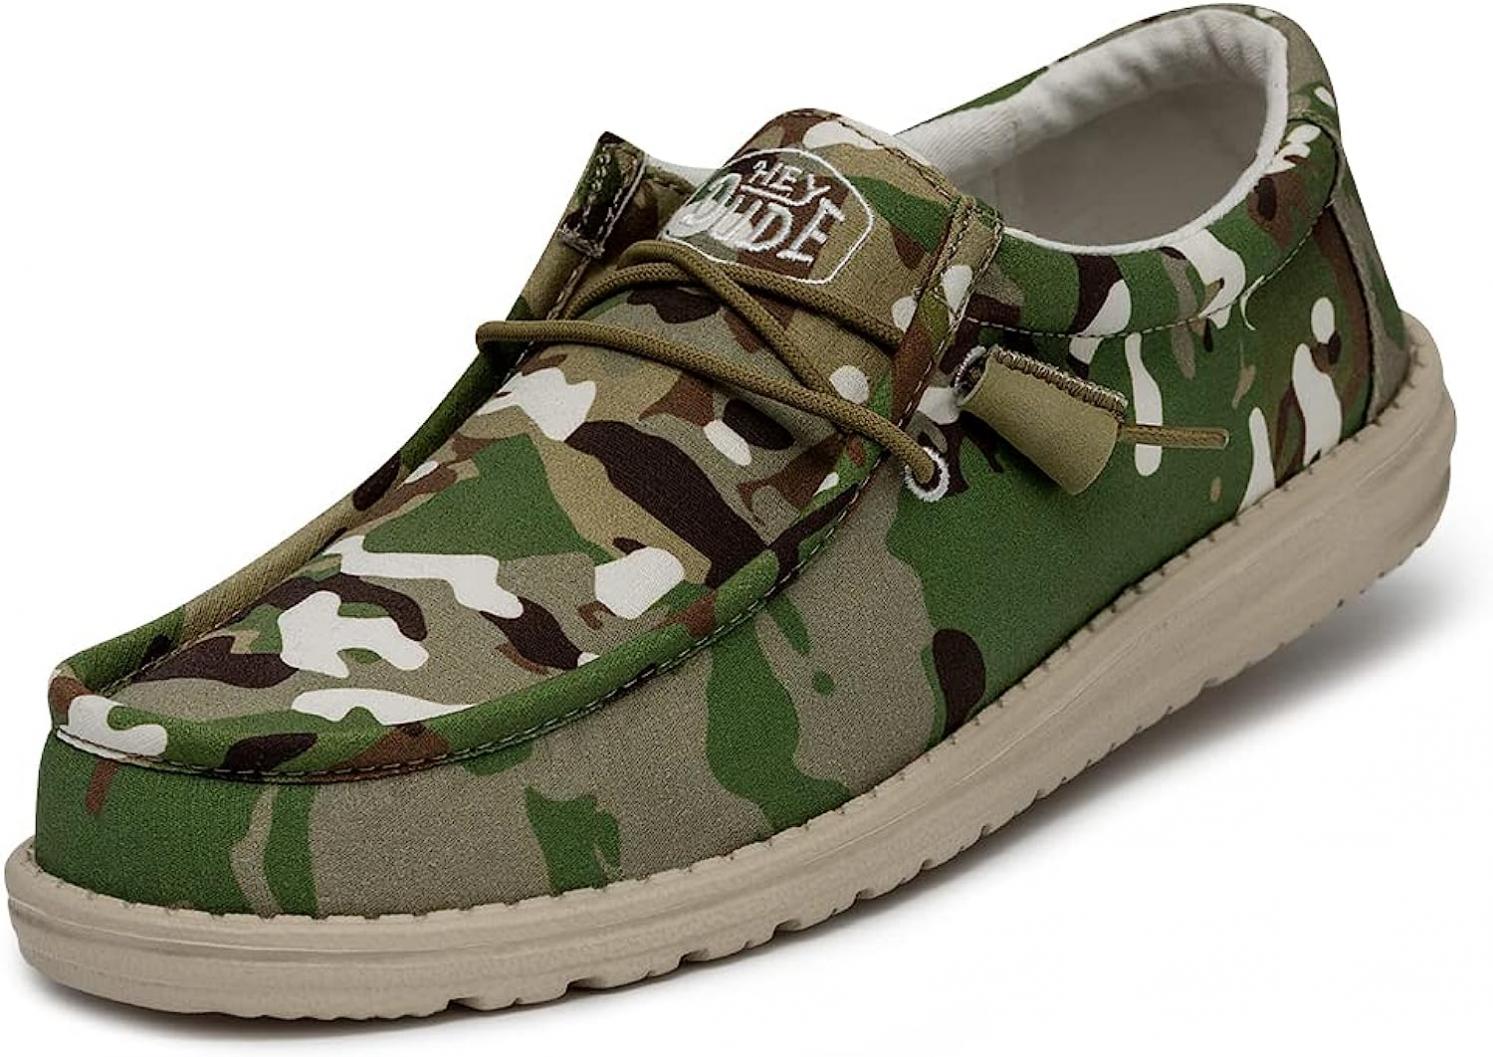 Hey Dude Men's Wally Ripstop Multi Camo Size 10| Men's Loafers | Men's Slip On Shoes | Comfortable & Light-Weight